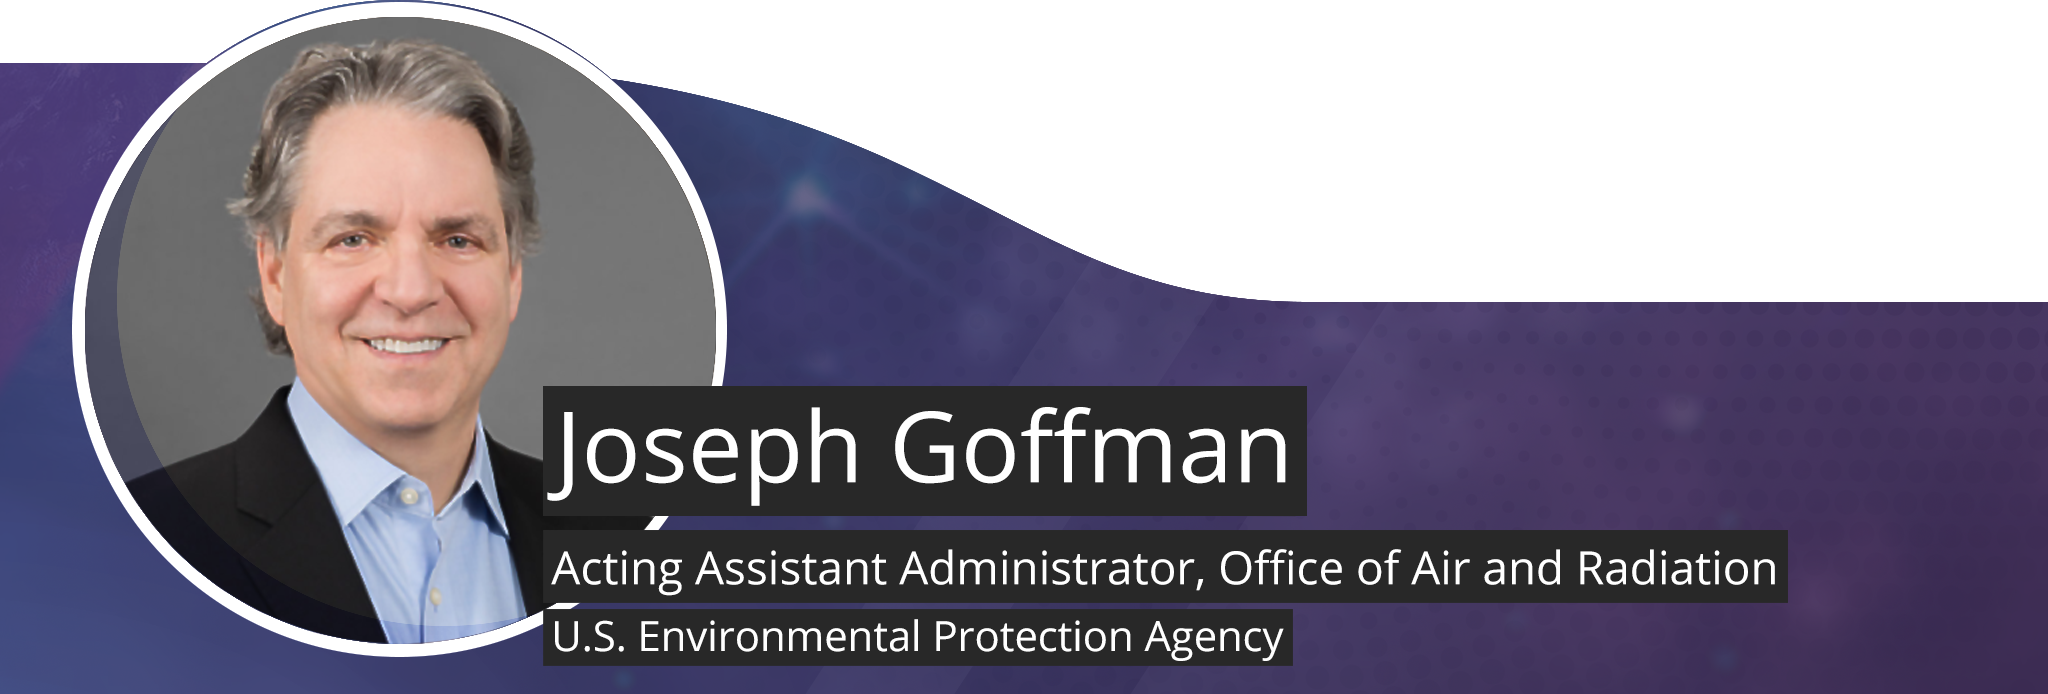 Headshot of Joseph Goffman, Acting Assistant Administrator, Office of Air and Radiation, U.S. Environmental Protection Agency